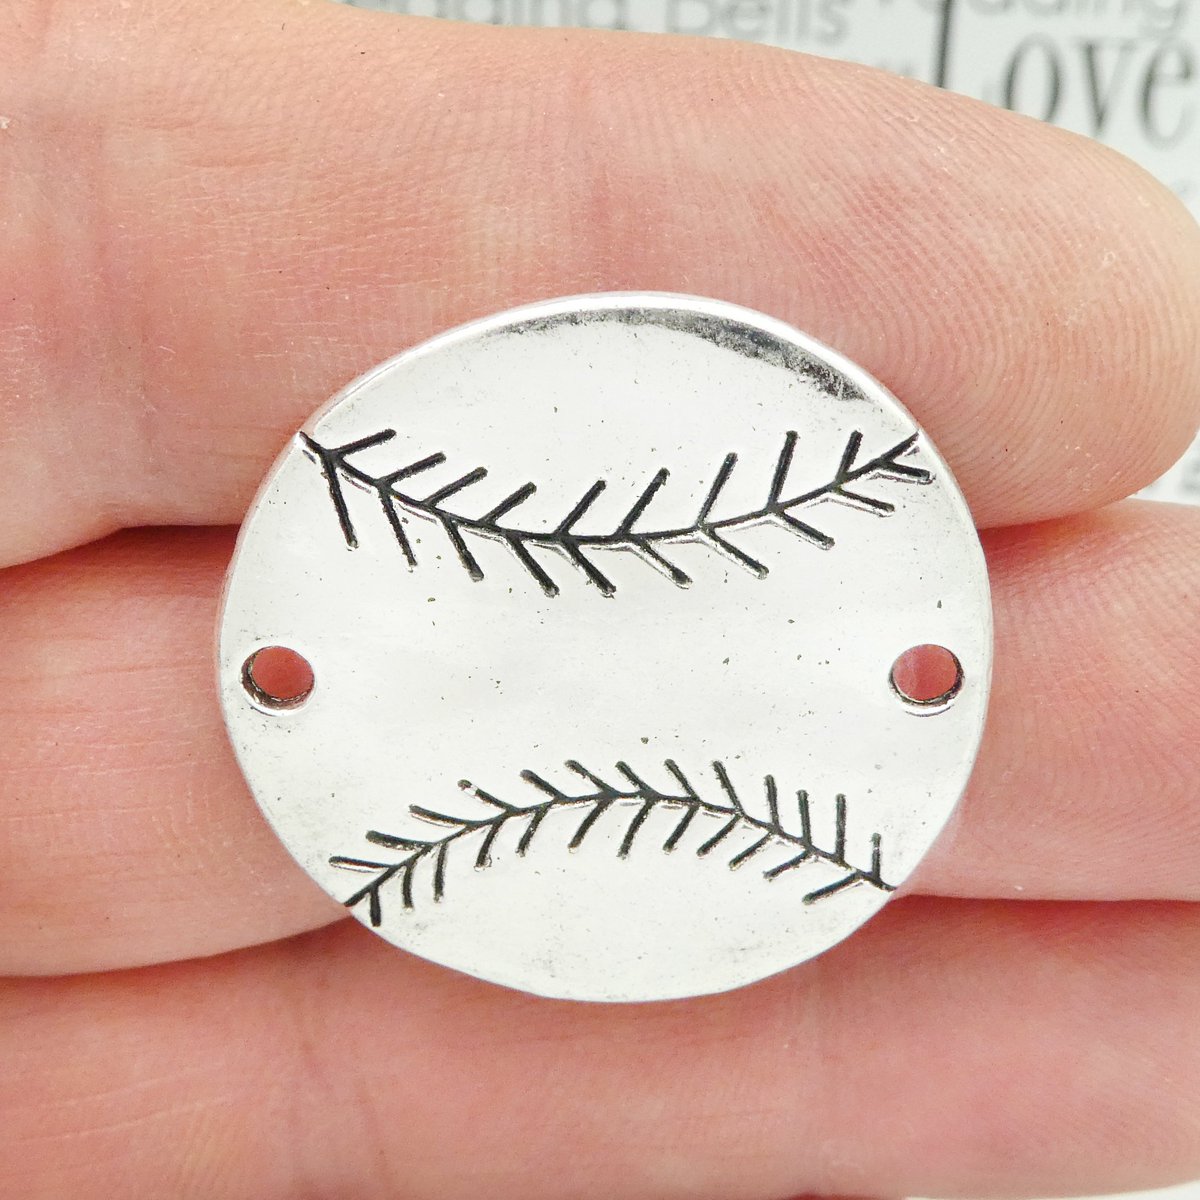 Excited to share the latest addition to my #etsy shop: 2 Baseball Bracelet Connector Silver by TIJC SP1819 etsy.me/2TDzRa7 #supplies #silver #footballpendant #sportscharm #braceletconnectors #connectors #jewelryconnectors #necklaceconnectors #charmconnectors